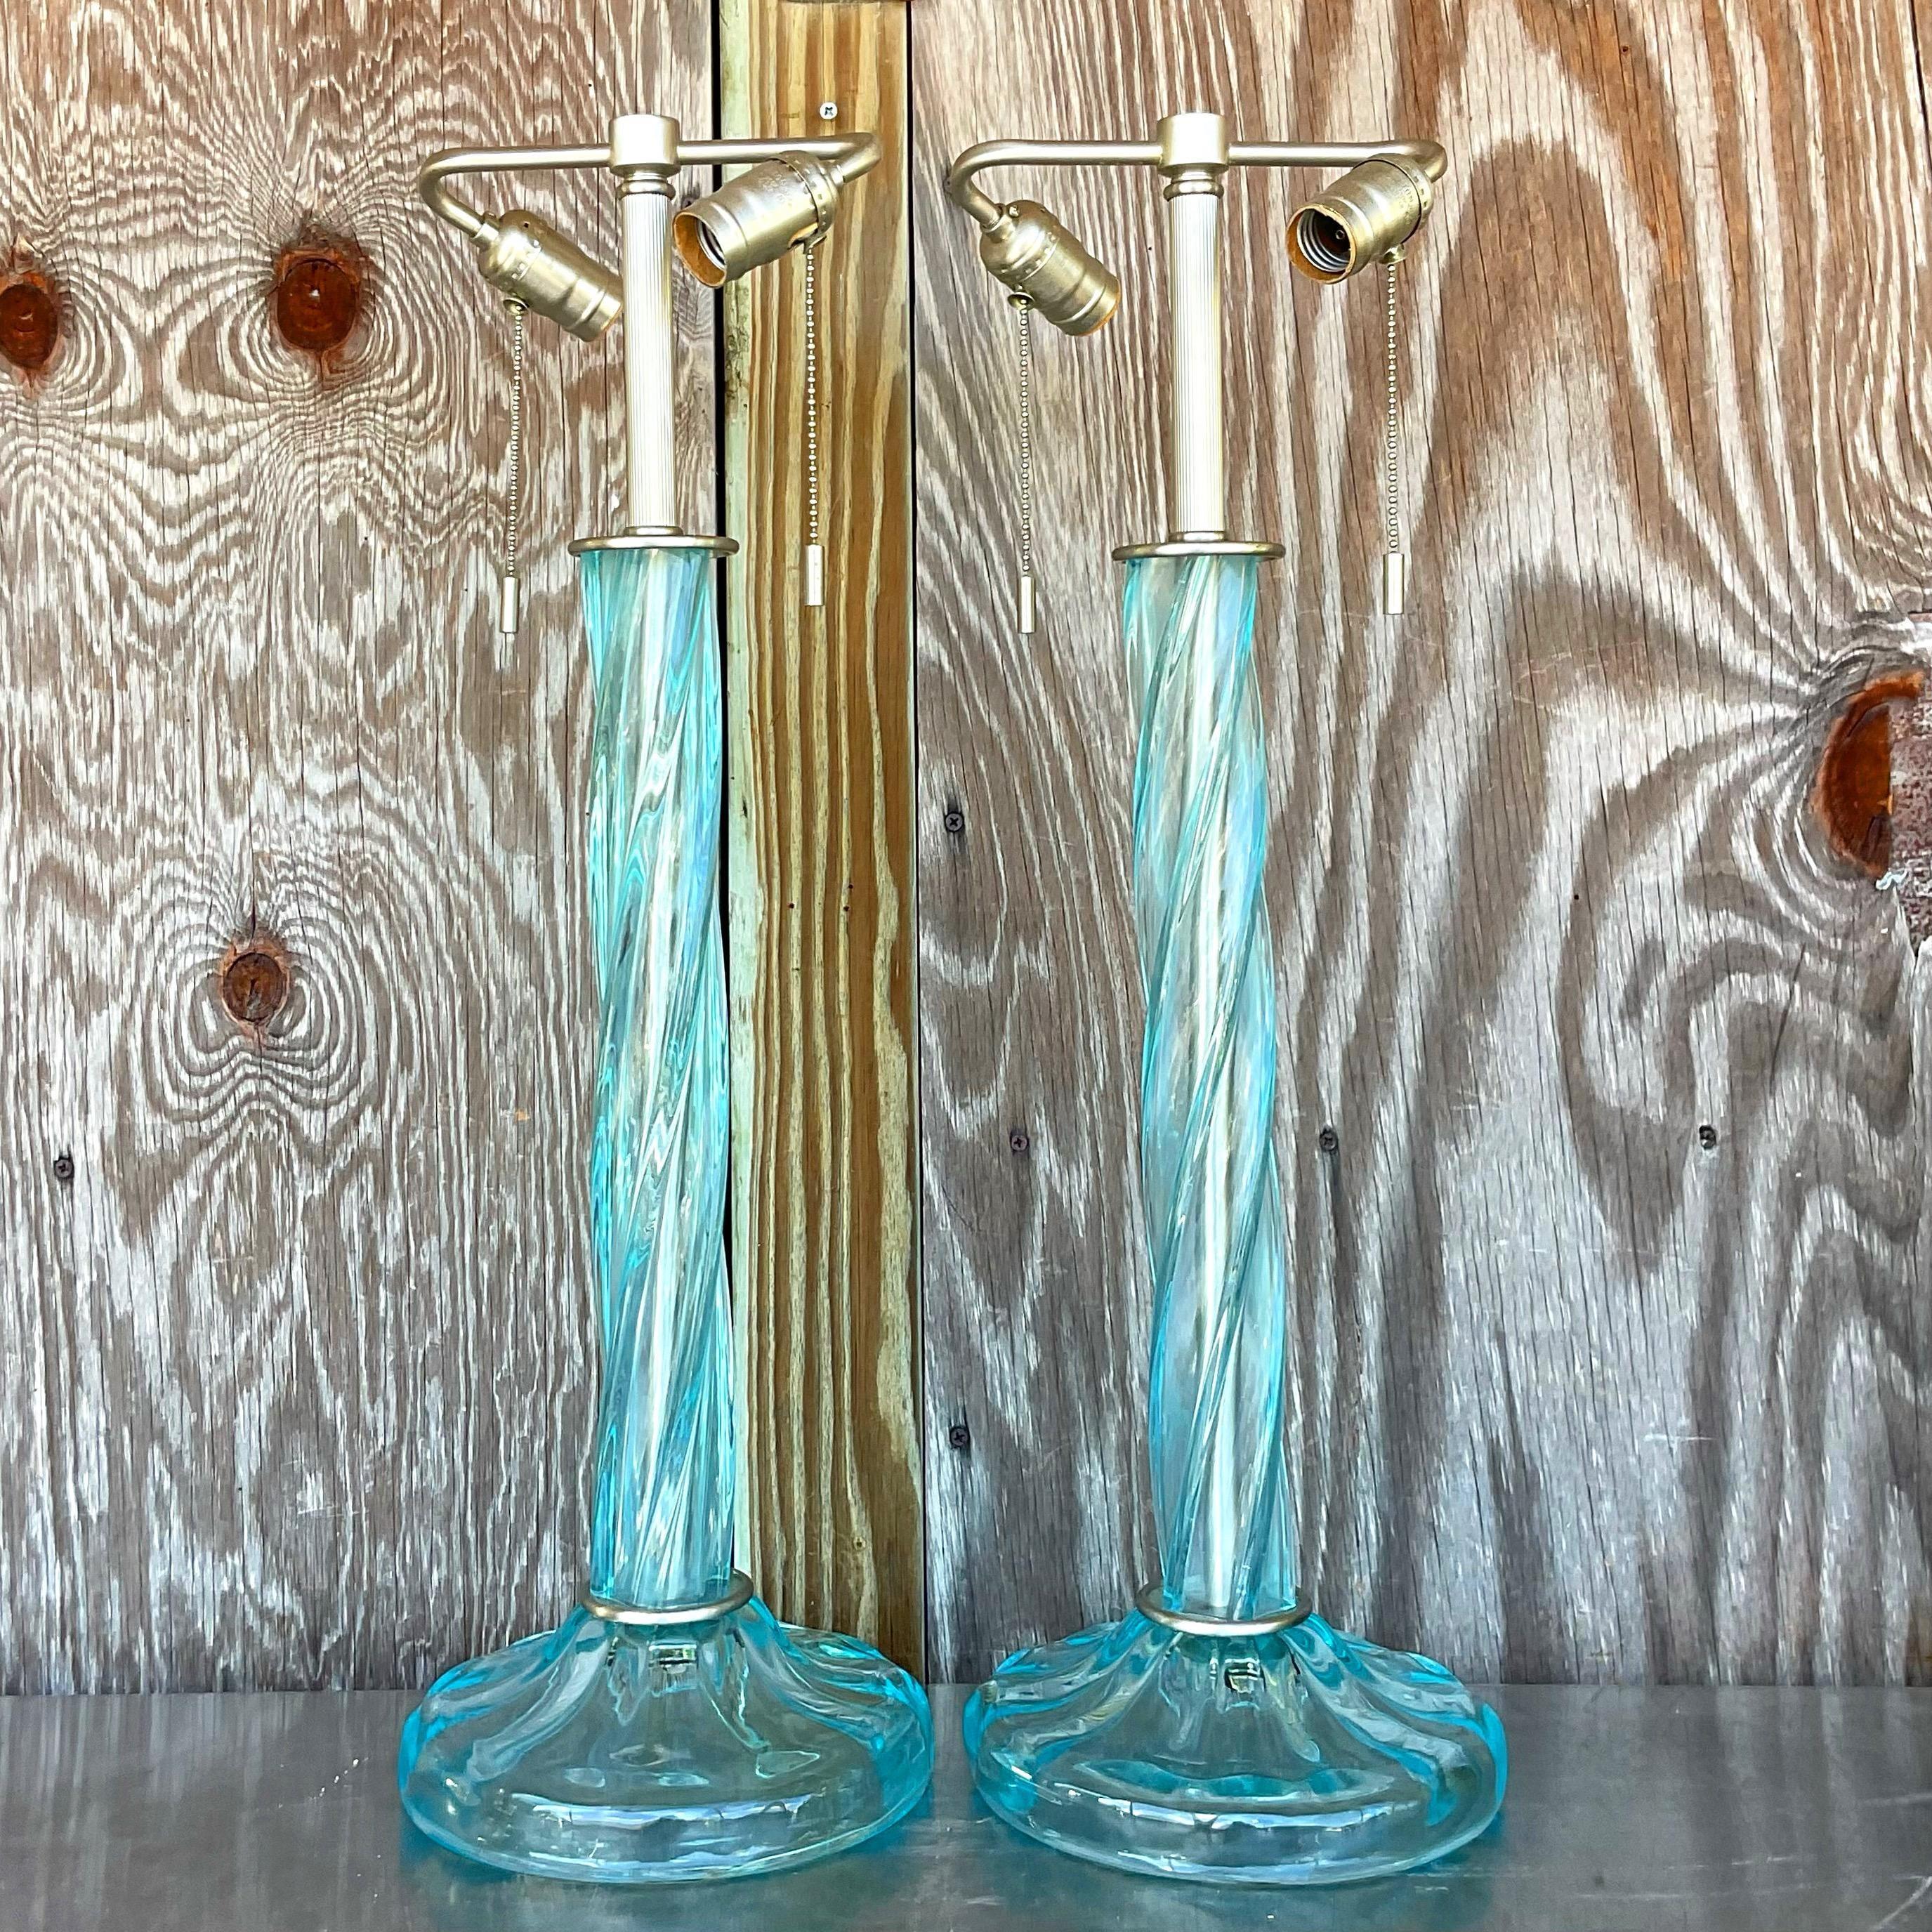 20th Century Vintage Boho Signed Donghia Twist Blown Glass Lamps - a Pair For Sale